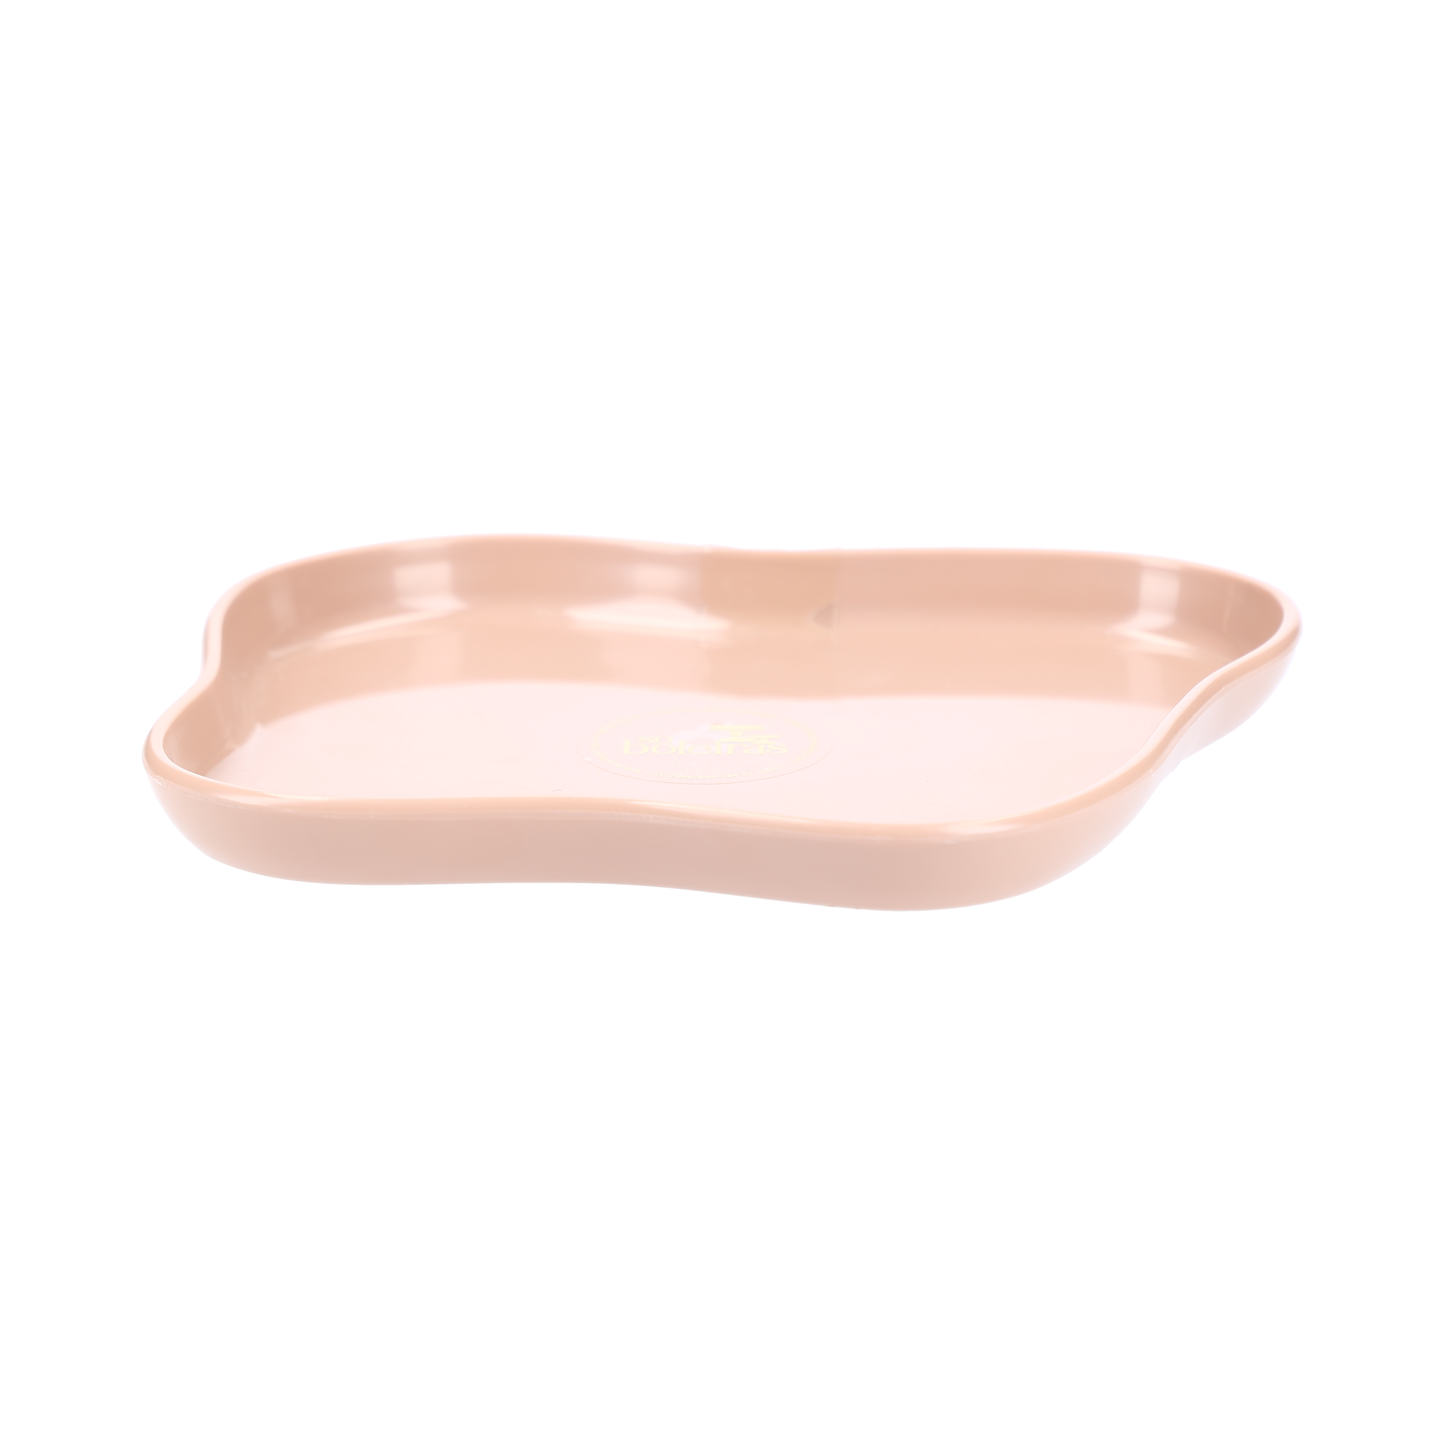 Nude organic tray " inches/180mm